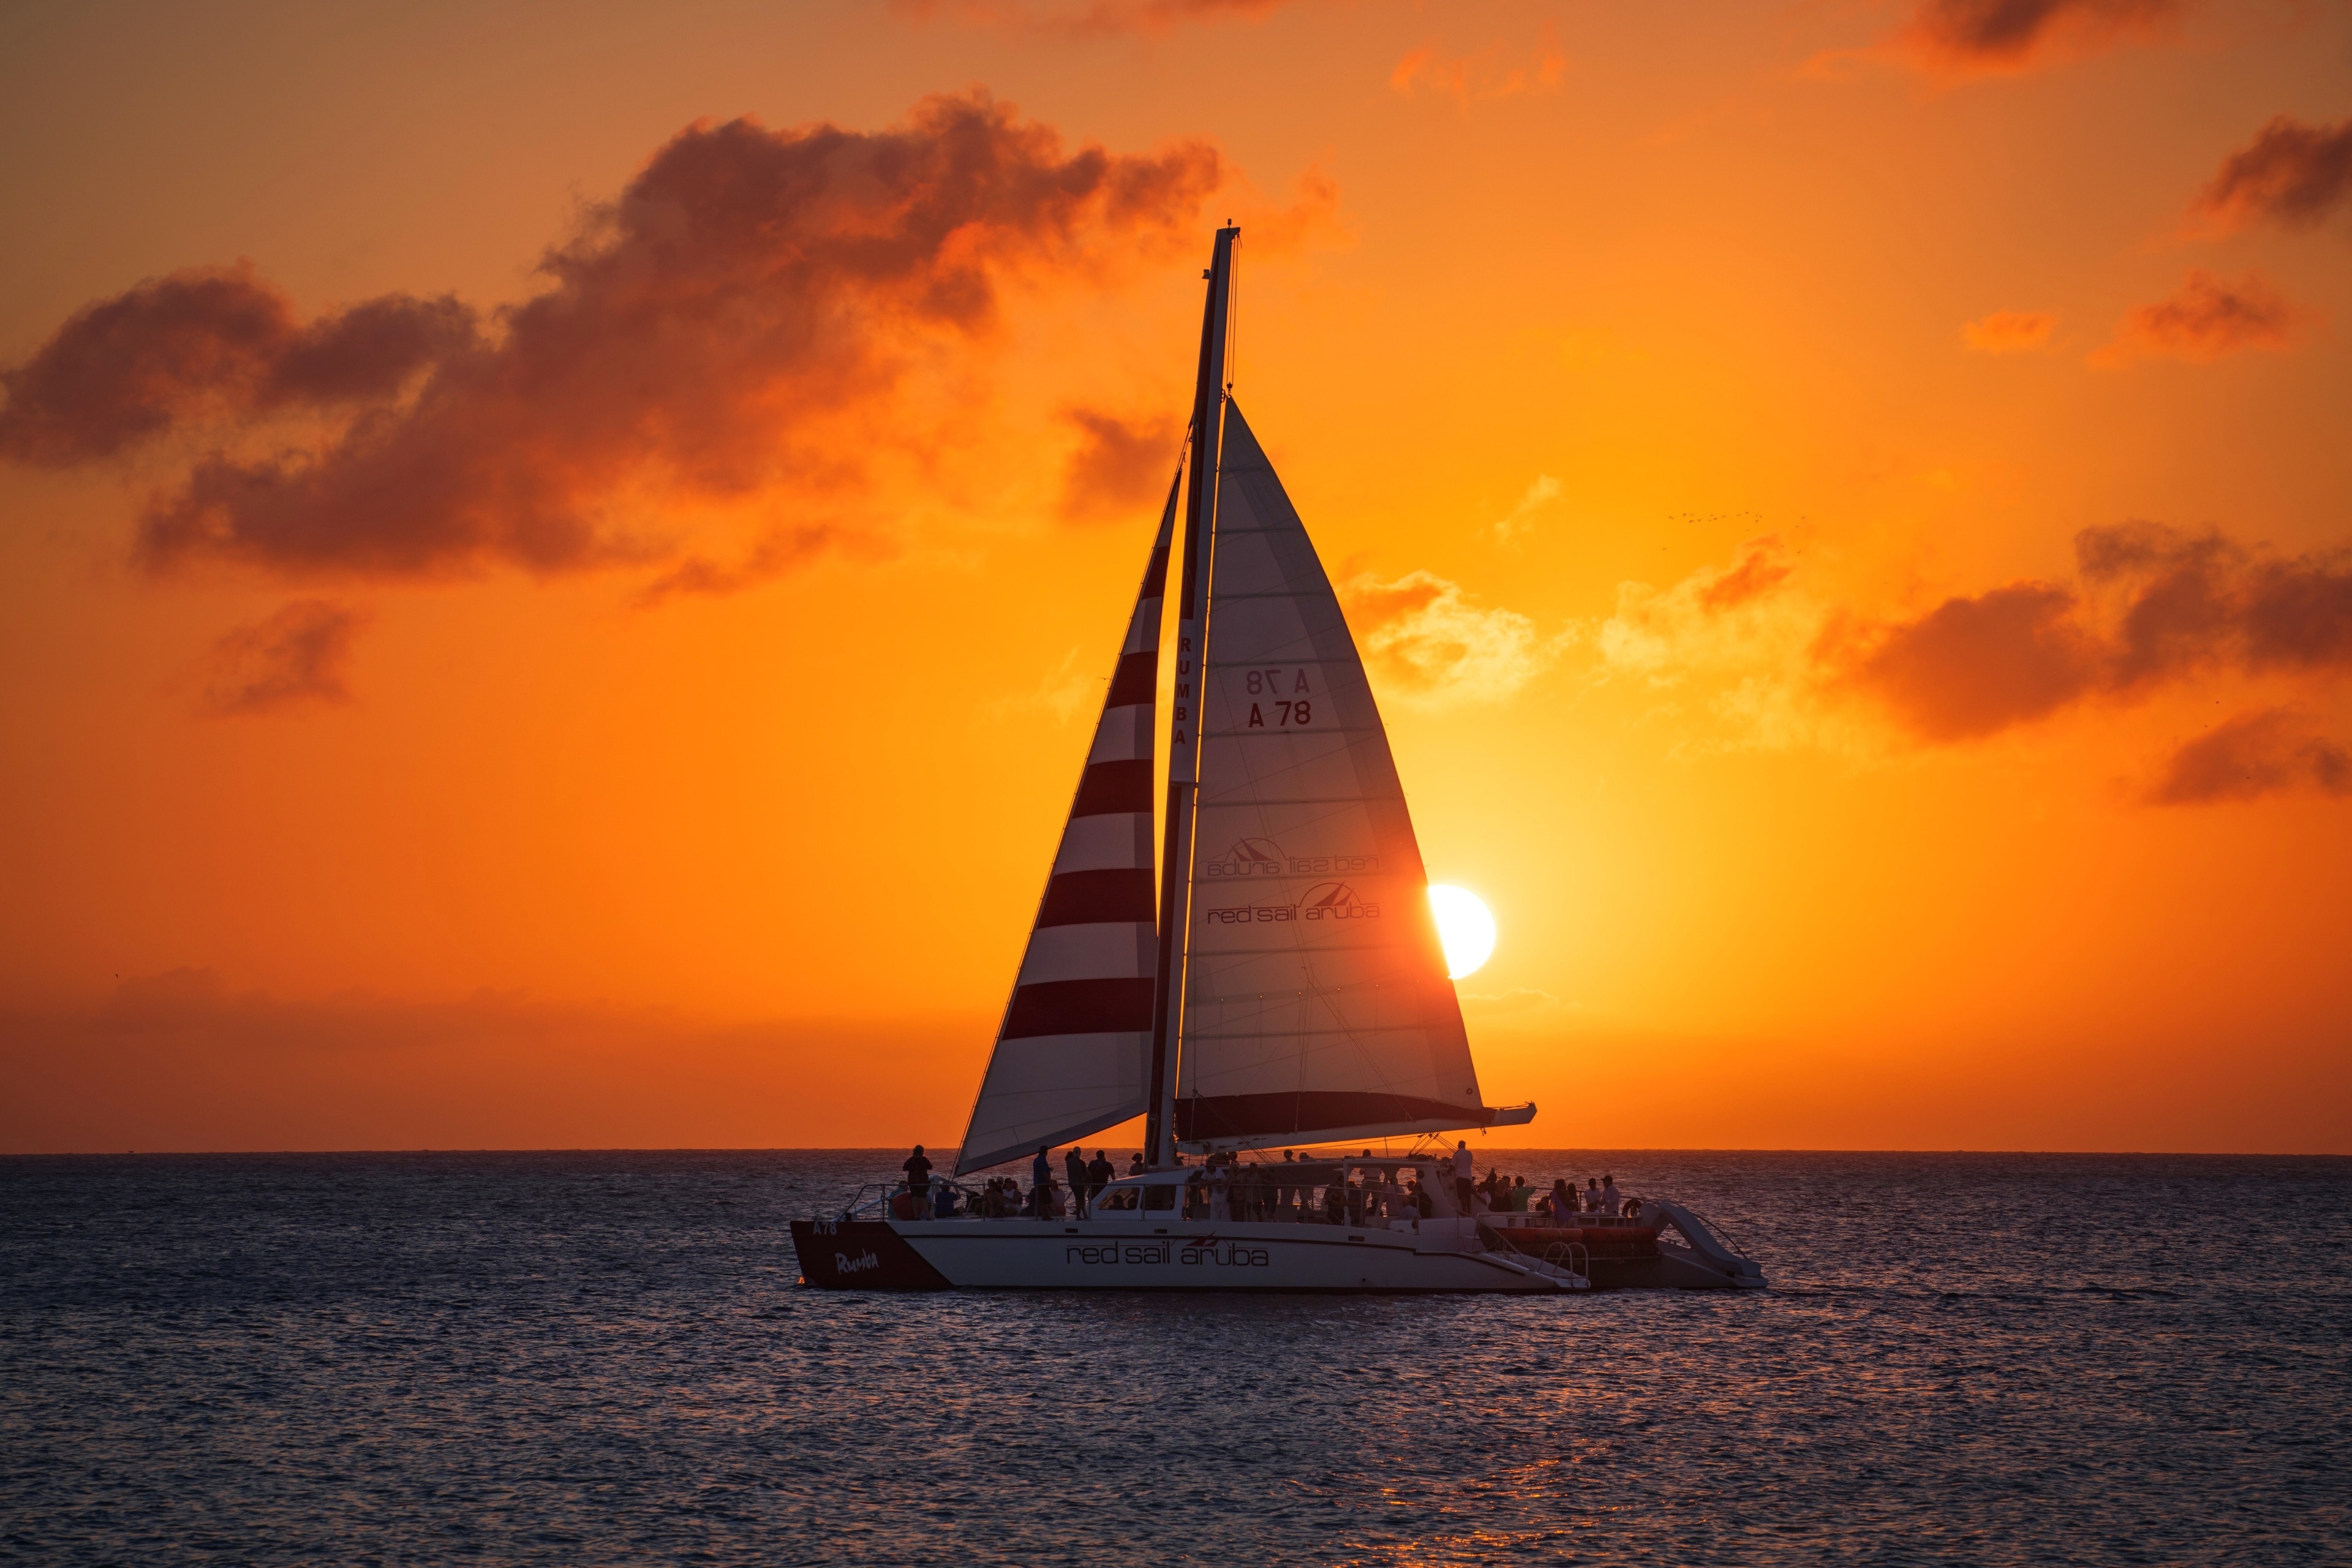 Watching the sailing boats glide across the water backlit by the setting sun at this rather low-key place on Aruba is an awesome way to end the day.